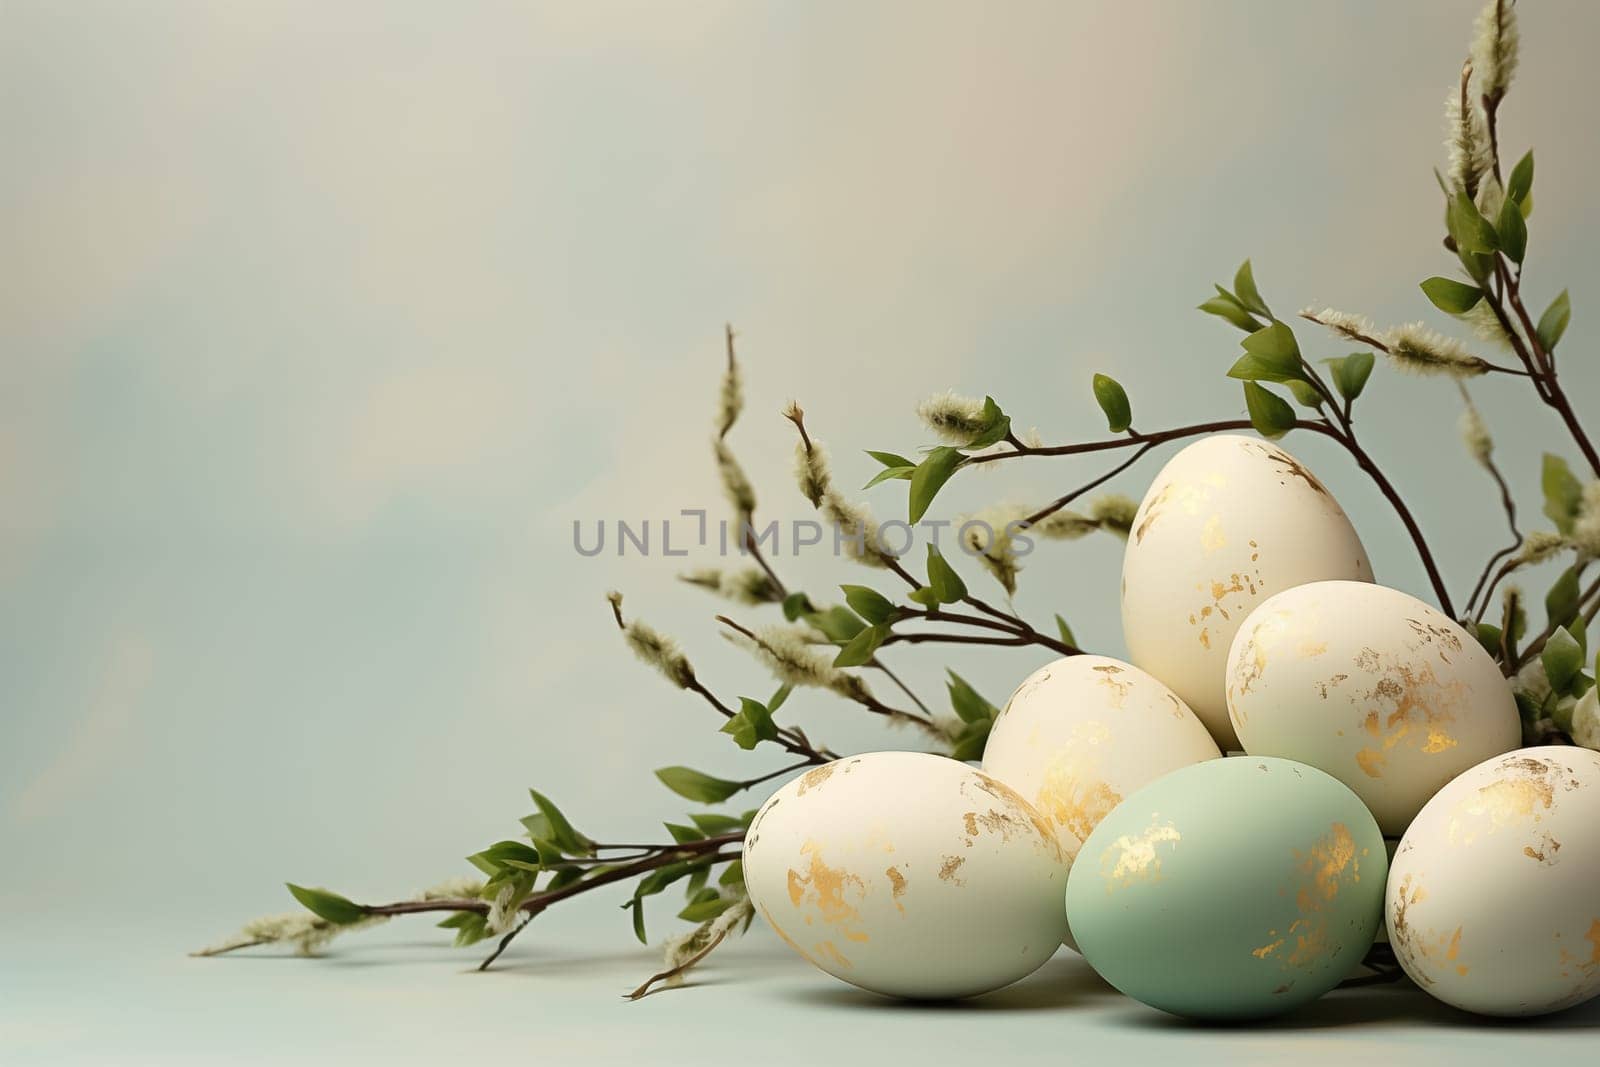 Composition with Easter eggs and green branches on beige background by Nadtochiy